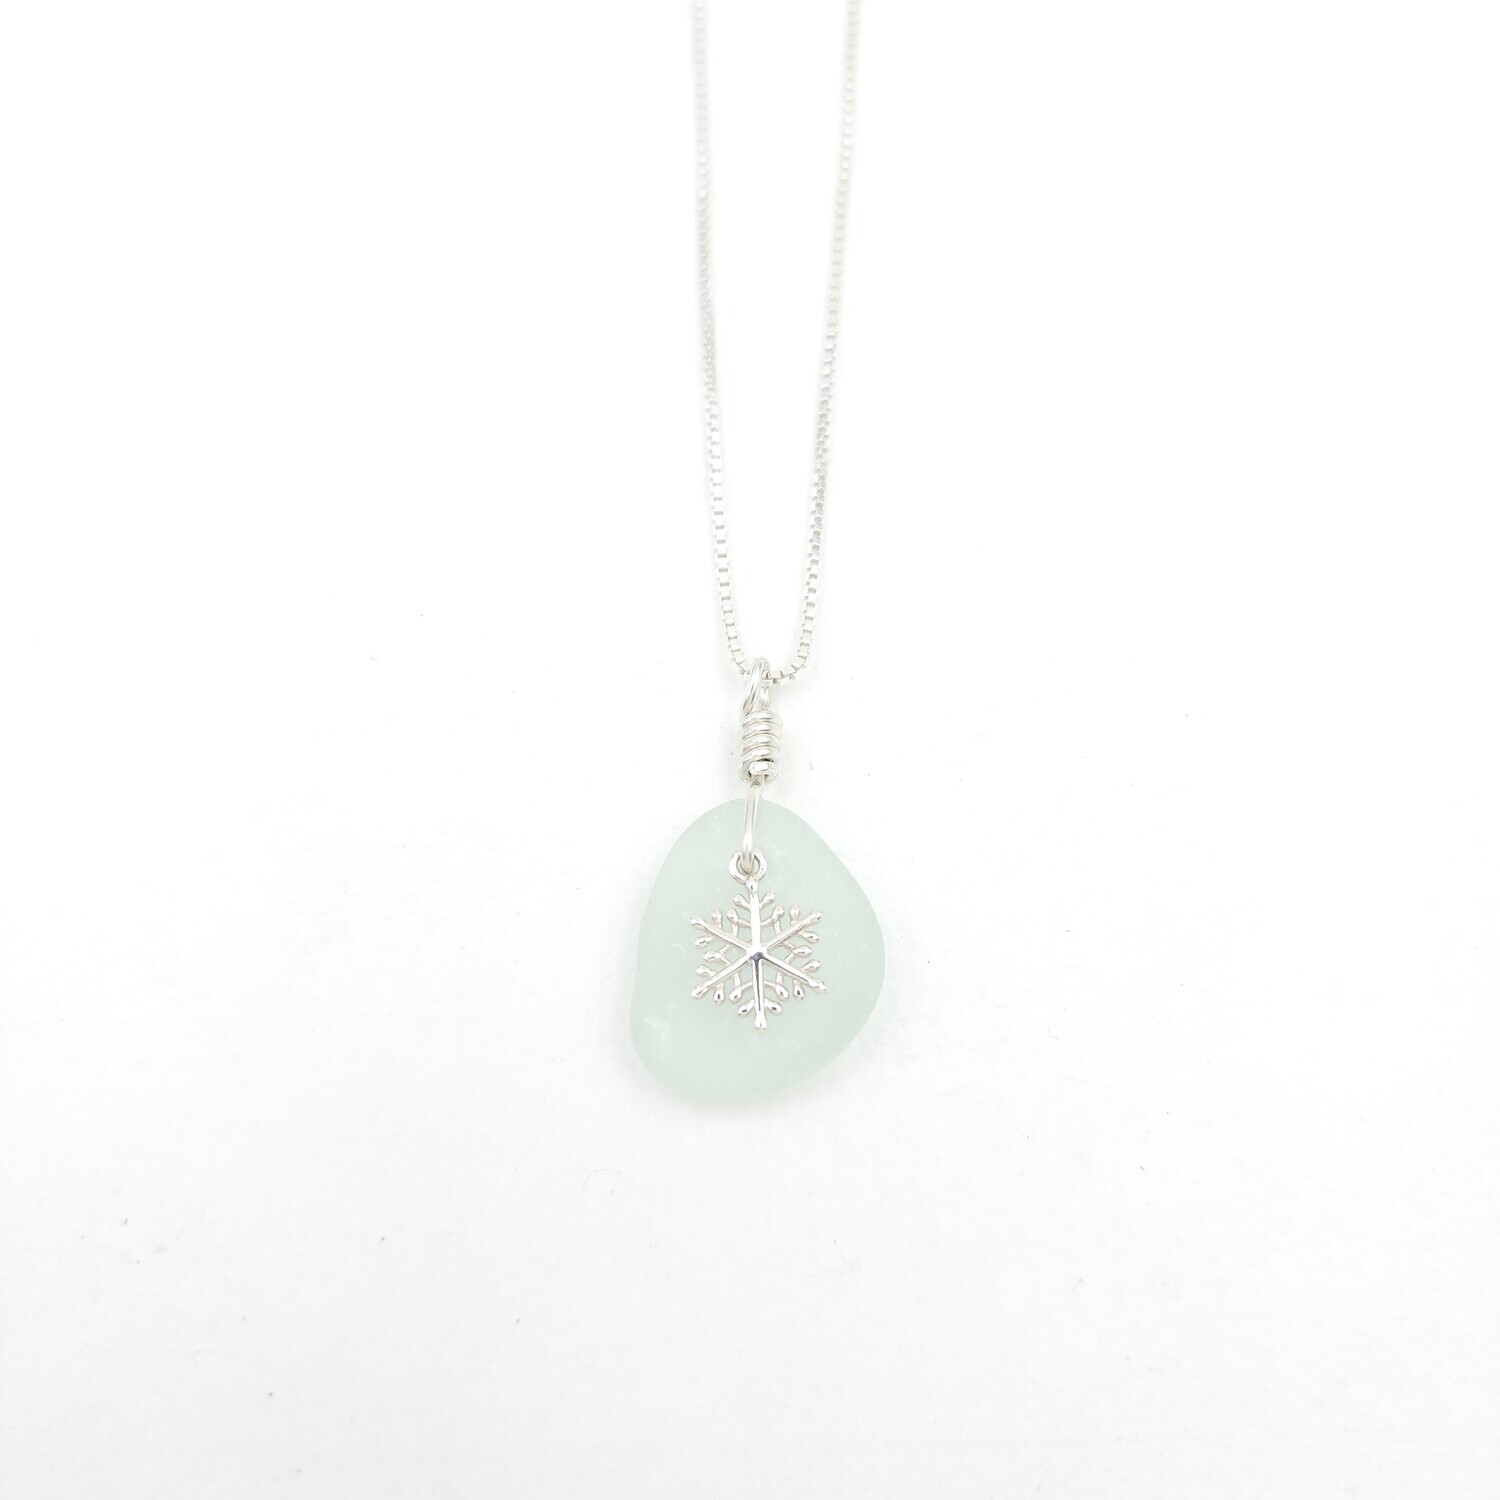 White Lake Erie Beach Glass and Snowflake Charm Necklace